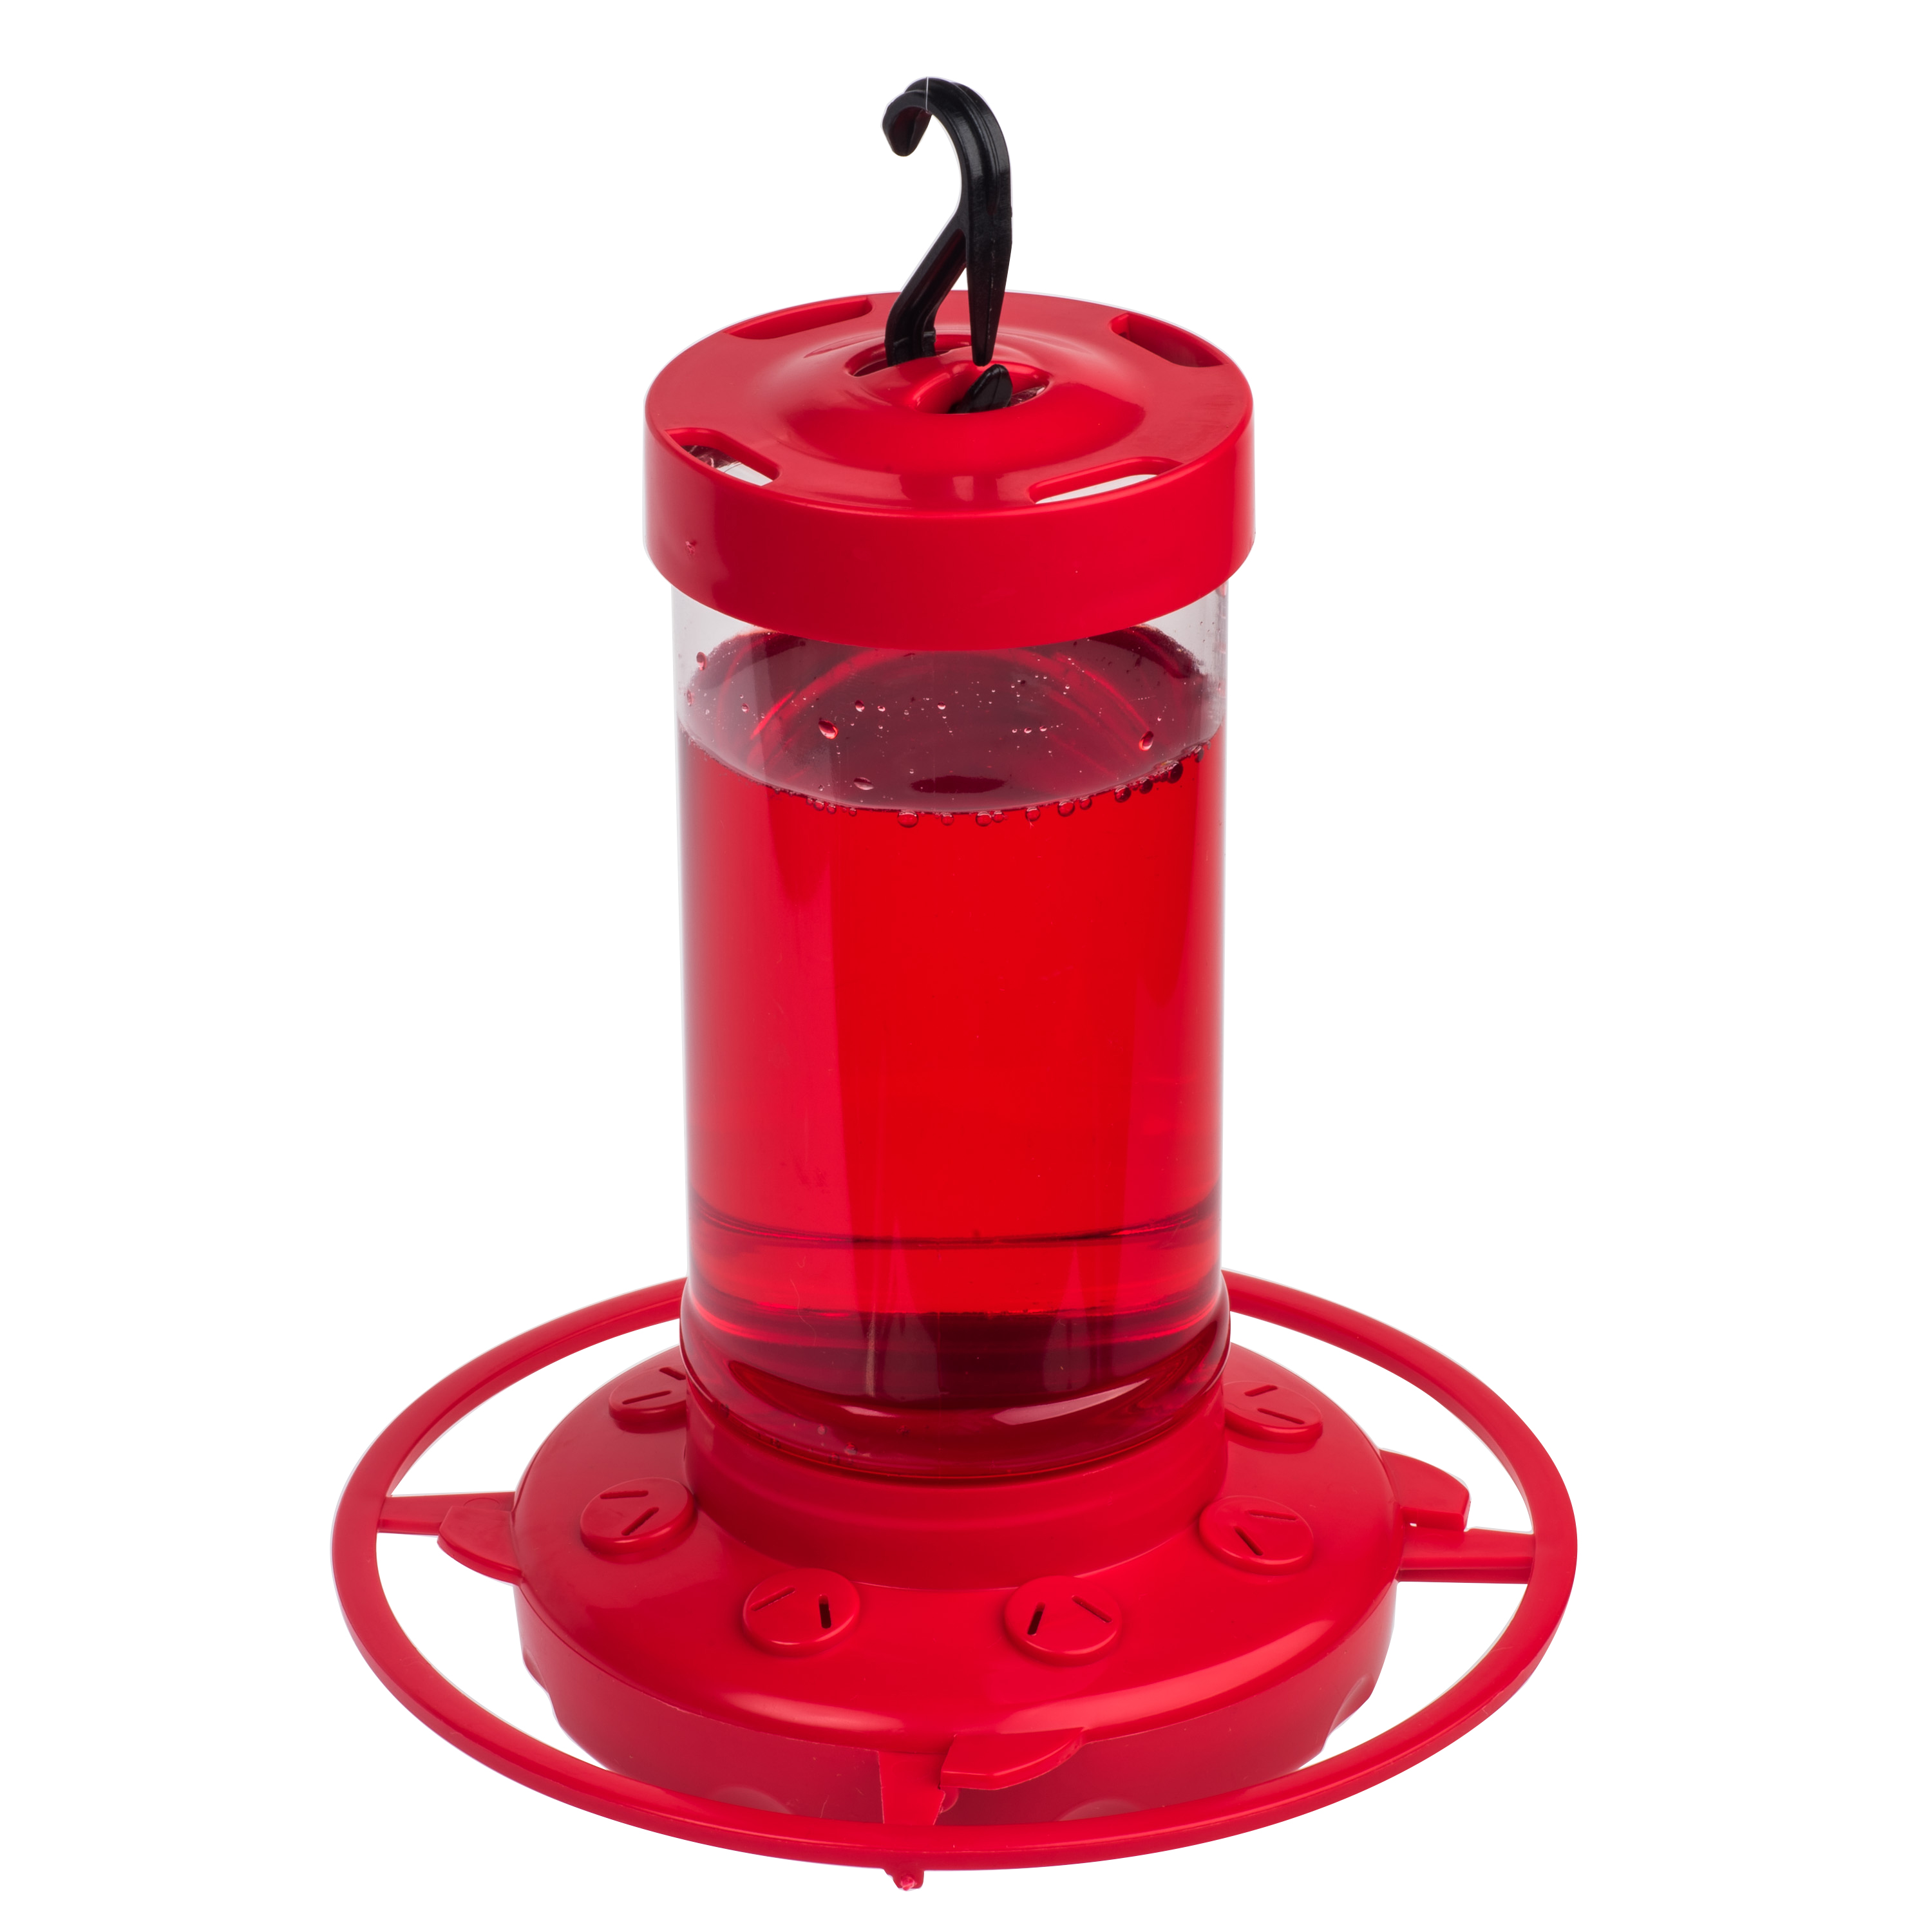 First Nature Hummingbird Feeder, 16 oz, Red, Plastic - image 4 of 13